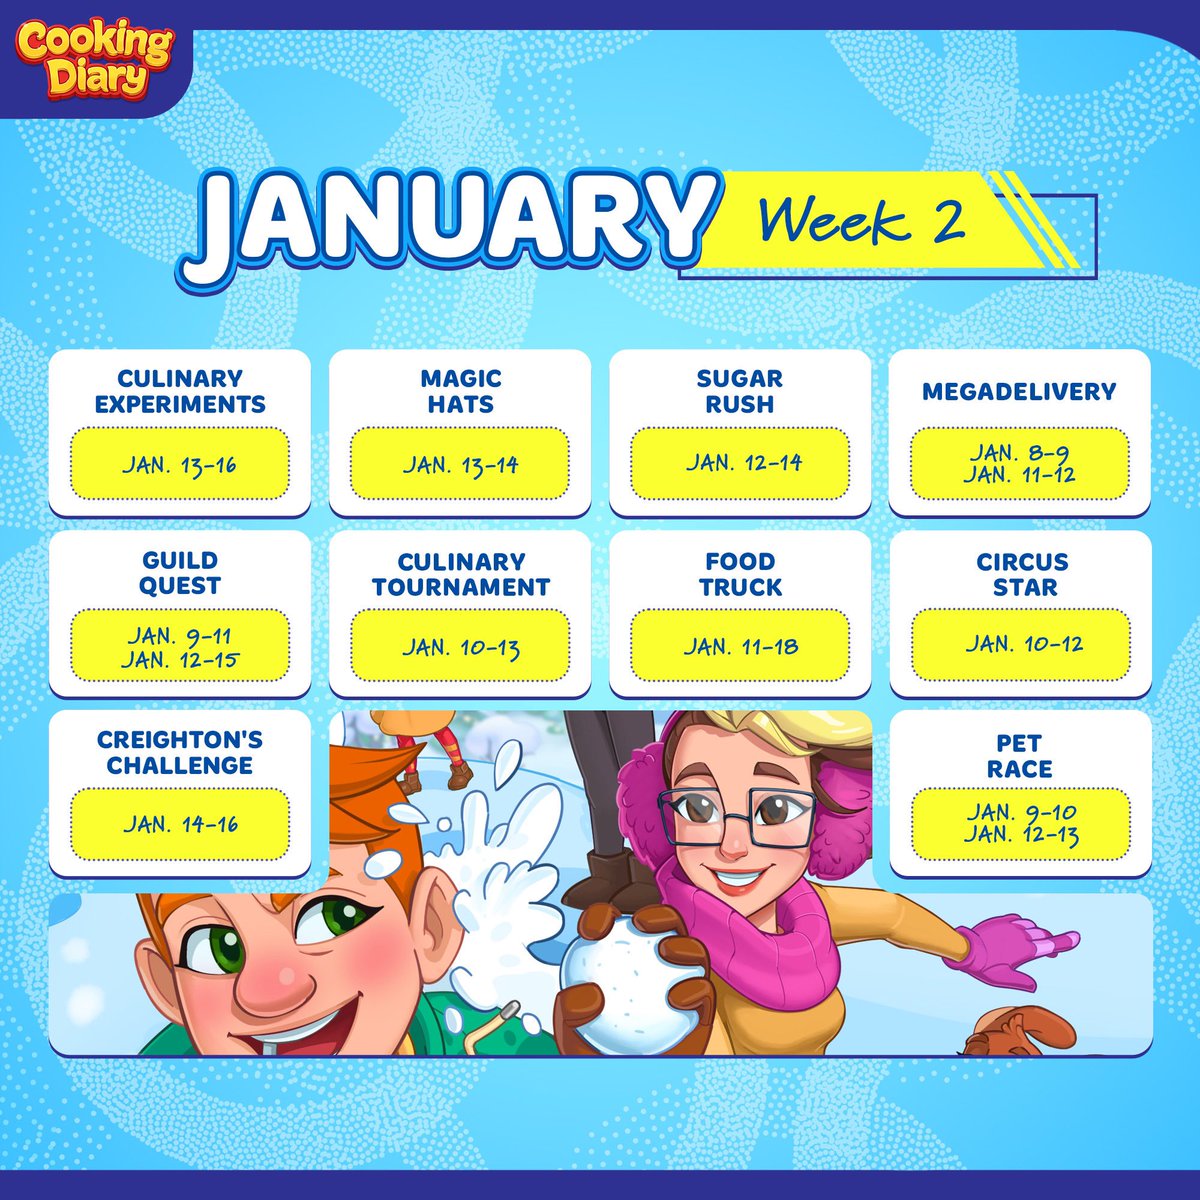 📅 Embrace the new week with excitement as we unveil a fresh event calendar! Prepare for challenges ahead and share with us which event you are anticipating the most. 